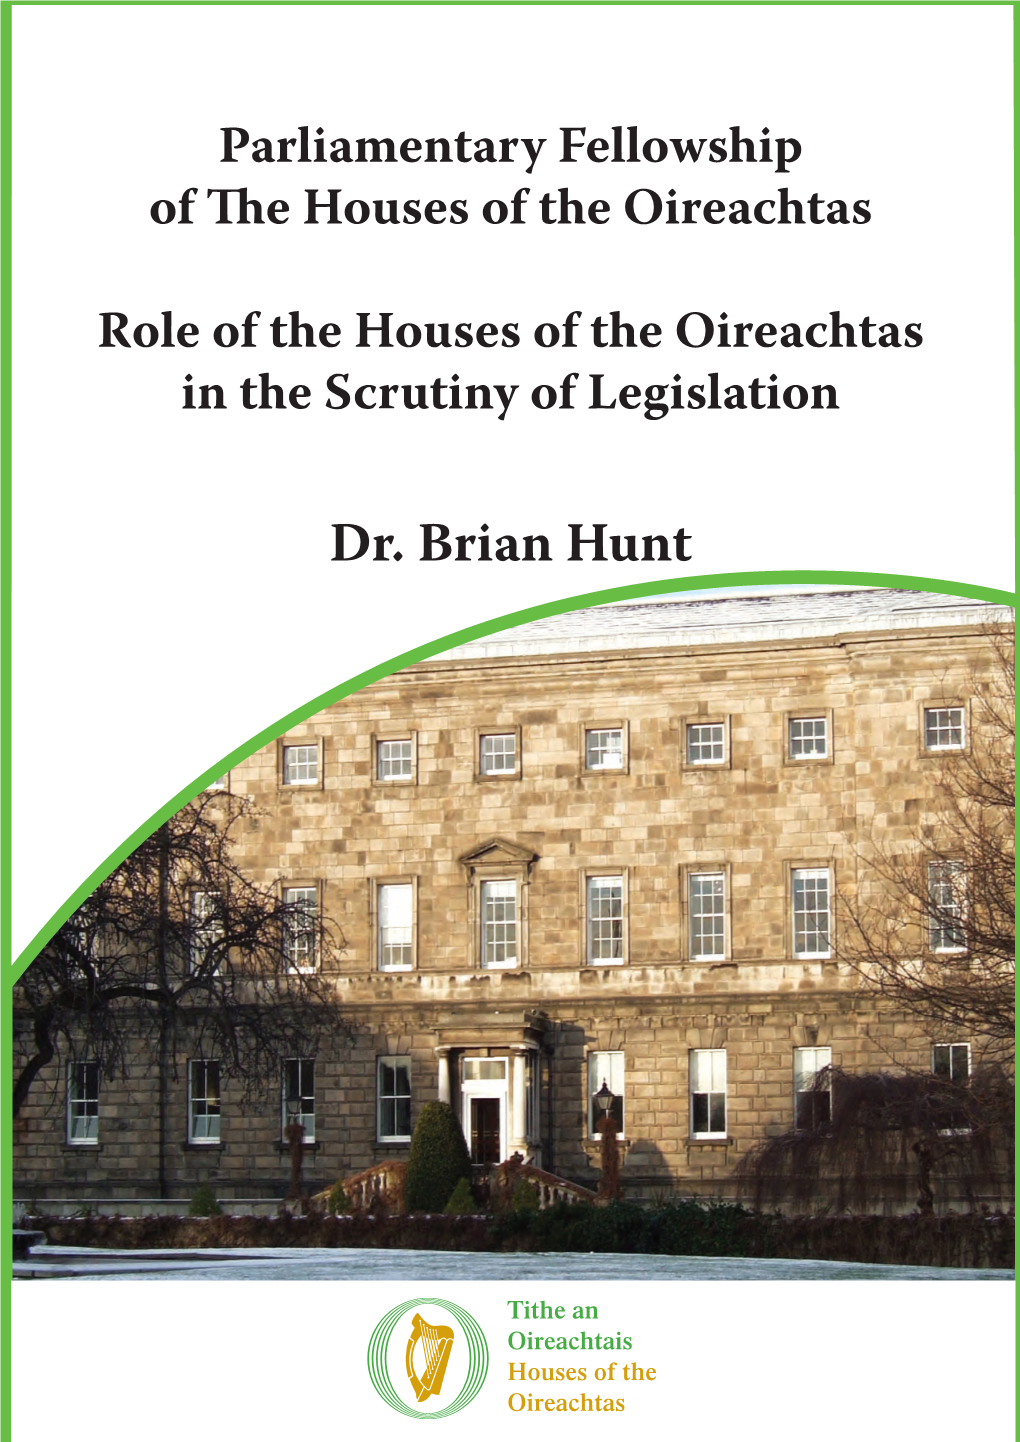 Role of the Houses of the Oireachtas in the Scrutiny of Legislation, Dr